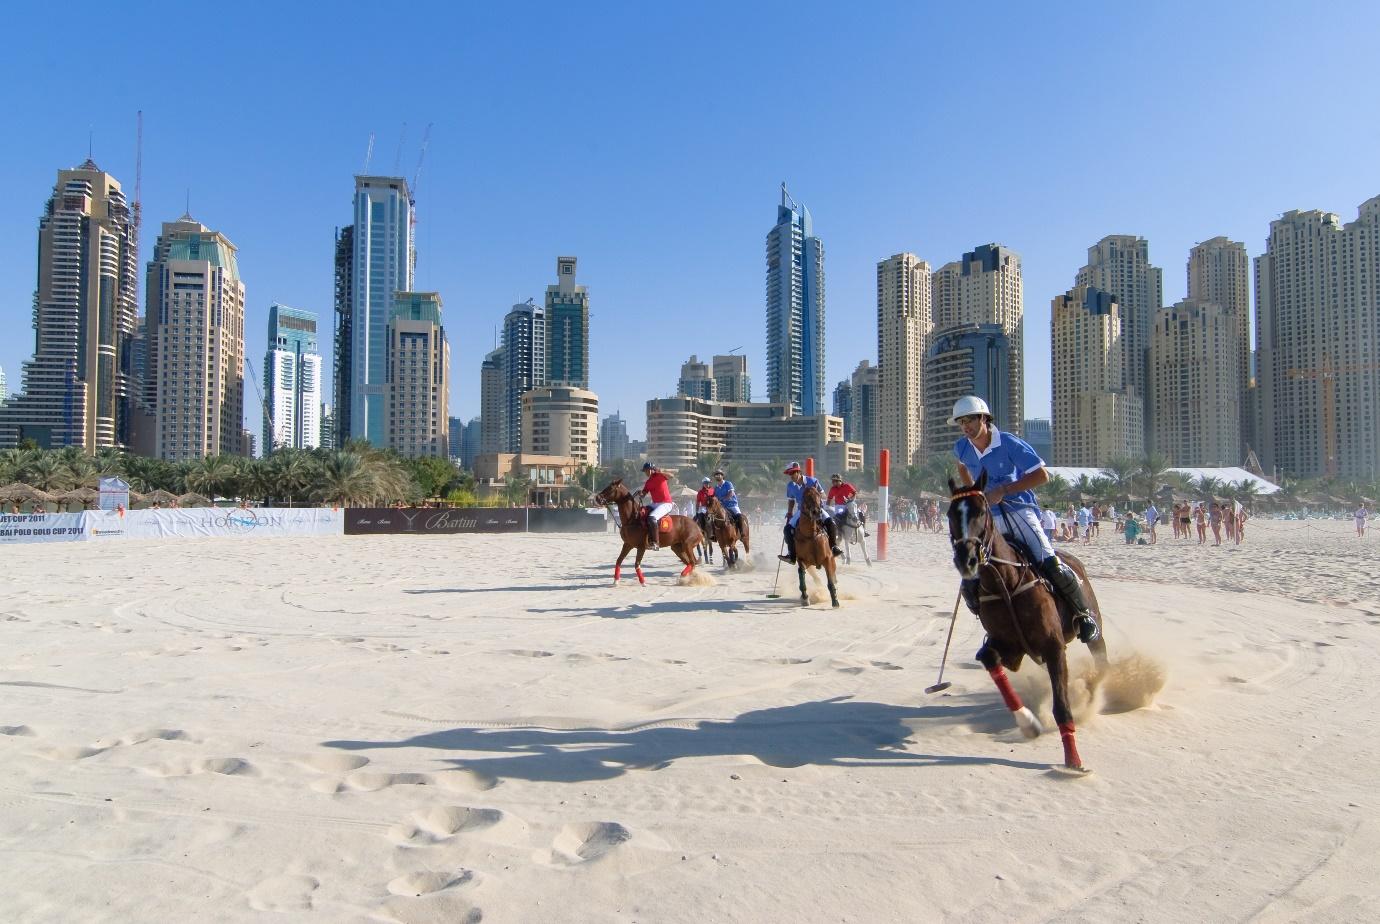 A group of people playing polo on a beach

Description automatically generated